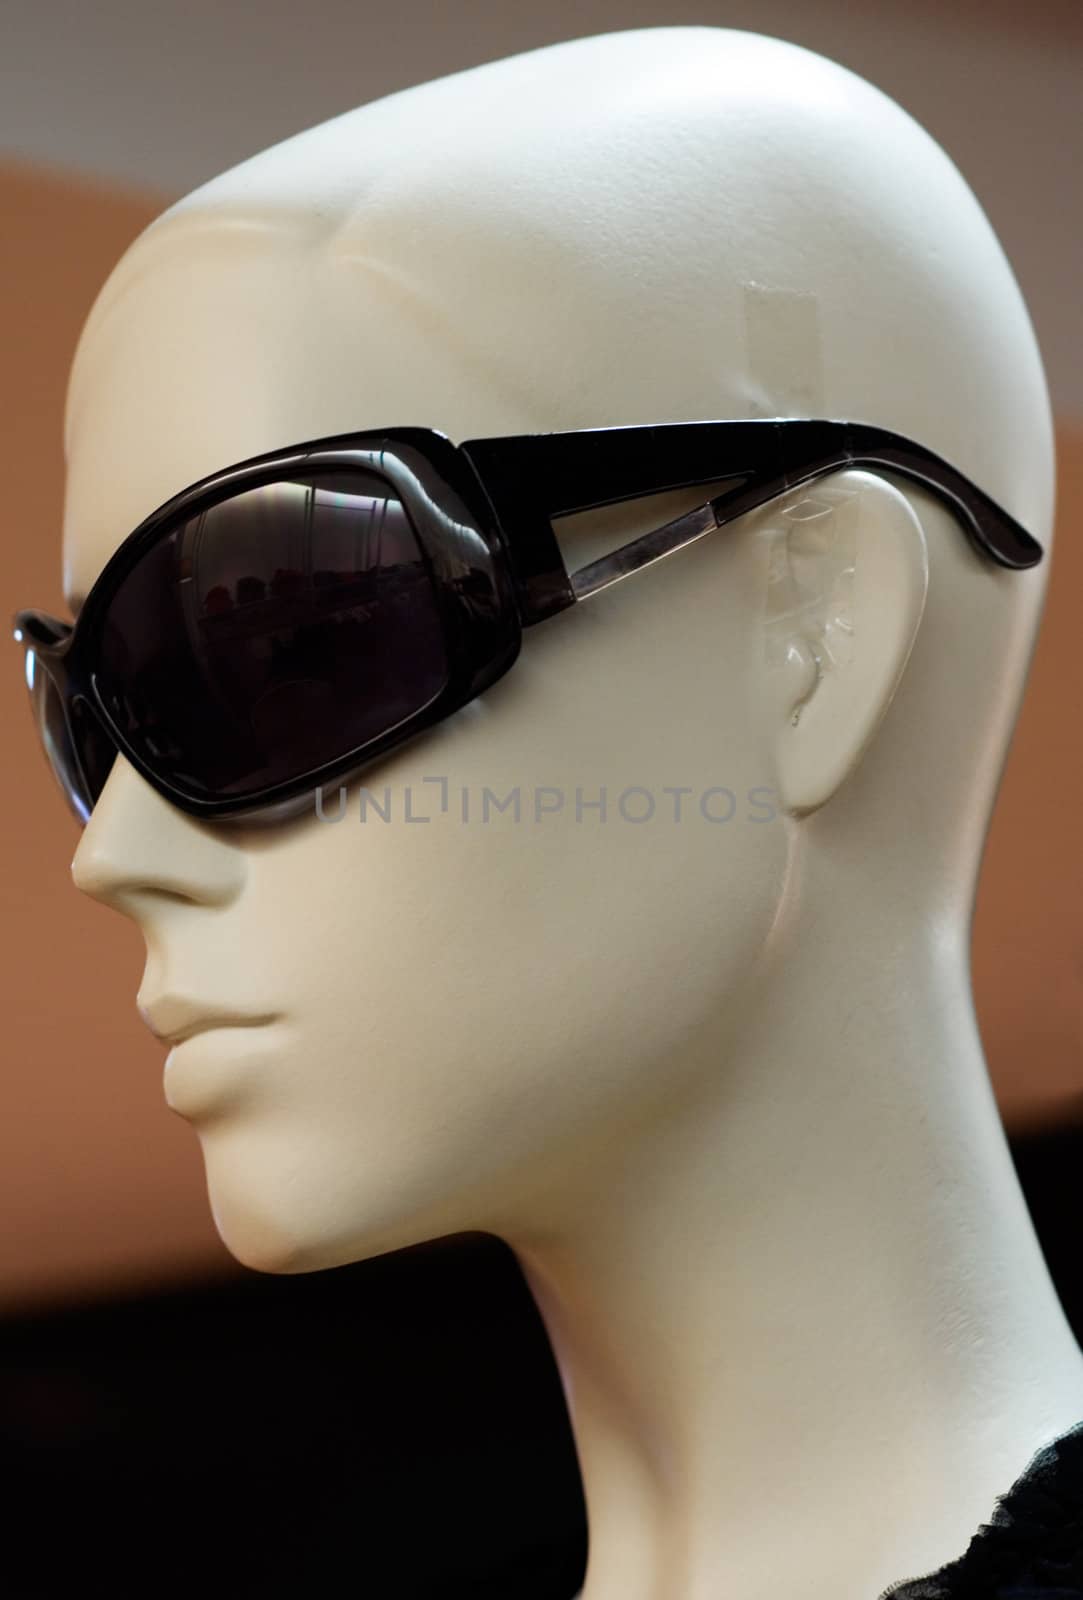 Mannequin with Sunglasses by winterling